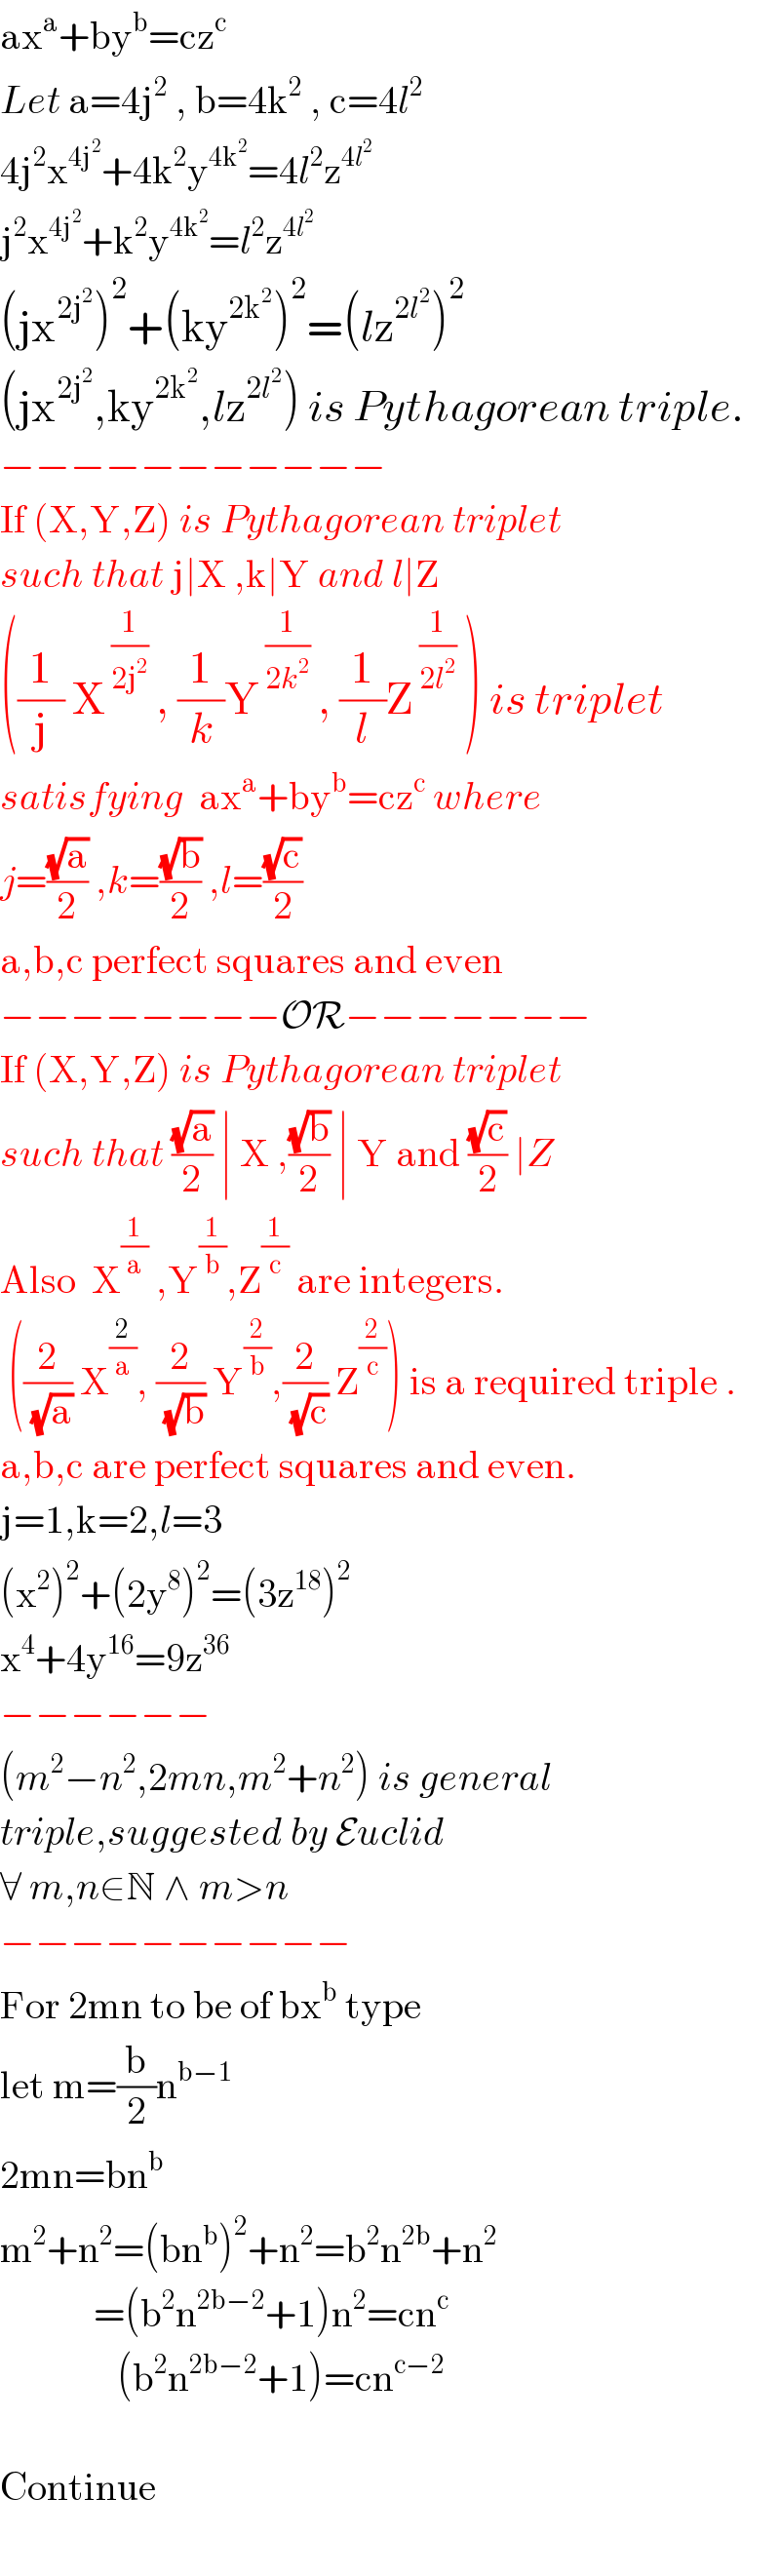 ax^a +by^b =cz^c   Let a=4j^2  , b=4k^2  , c=4l^2   4j^2 x^(4j^2 ) +4k^2 y^(4k^2 ) =4l^2 z^(4l^2 )   j^2 x^(4j^2 ) +k^2 y^(4k^2 ) =l^2 z^(4l^2 )   (jx^(2j^2 ) )^2 +(ky^(2k^2 ) )^2 =(lz^(2l^2 ) )^2   (jx^(2j^2 ) ,ky^(2k^2 ) ,lz^(2l^2 ) ) is Pythagorean triple.  −−−−−−−−−−−  If (X,Y,Z) is Pythagorean triplet  such that j∣X ,k∣Y and l∣Z  ((1/j) X^( (1/(2j^2 )))  , (1/k)Y^( (1/(2k^2 )))  , (1/l)Z^( (1/(2l^2 )))  ) is triplet  satisfying  ax^a +by^b =cz^c  where  j=((√a)/2) ,k=((√b)/2) ,l=((√c)/2)  a,b,c perfect squares and even  −−−−−−−−OR−−−−−−−  If (X,Y,Z) is Pythagorean triplet  such that ((√a)/2) ∣ X ,((√b)/2) ∣ Y and ((√c)/2) ∣Z  Also  X^(1/a)  ,Y^(1/b) ,Z^(1/c)  are integers.   ((2/(√a)) X^(2/a) , (2/(√b)) Y^(2/b) ,(2/(√c)) Z^(2/c) ) is a required triple .  a,b,c are perfect squares and even.  j=1,k=2,l=3  (x^2 )^2 +(2y^8 )^2 =(3z^(18) )^2   x^4 +4y^(16) =9z^(36)   −−−−−−  (m^2 −n^2 ,2mn,m^2 +n^2 ) is general  triple,suggested by Euclid  ∀ m,n∈N ∧ m>n  −−−−−−−−−−  For 2mn to be of bx^b  type  let m=(b/2)n^(b−1)   2mn=bn^b   m^2 +n^2 =(bn^b )^2 +n^2 =b^2 n^(2b) +n^2               =(b^2 n^(2b−2) +1)n^2 =cn^c                  (b^2 n^(2b−2) +1)=cn^(c−2)     Continue    